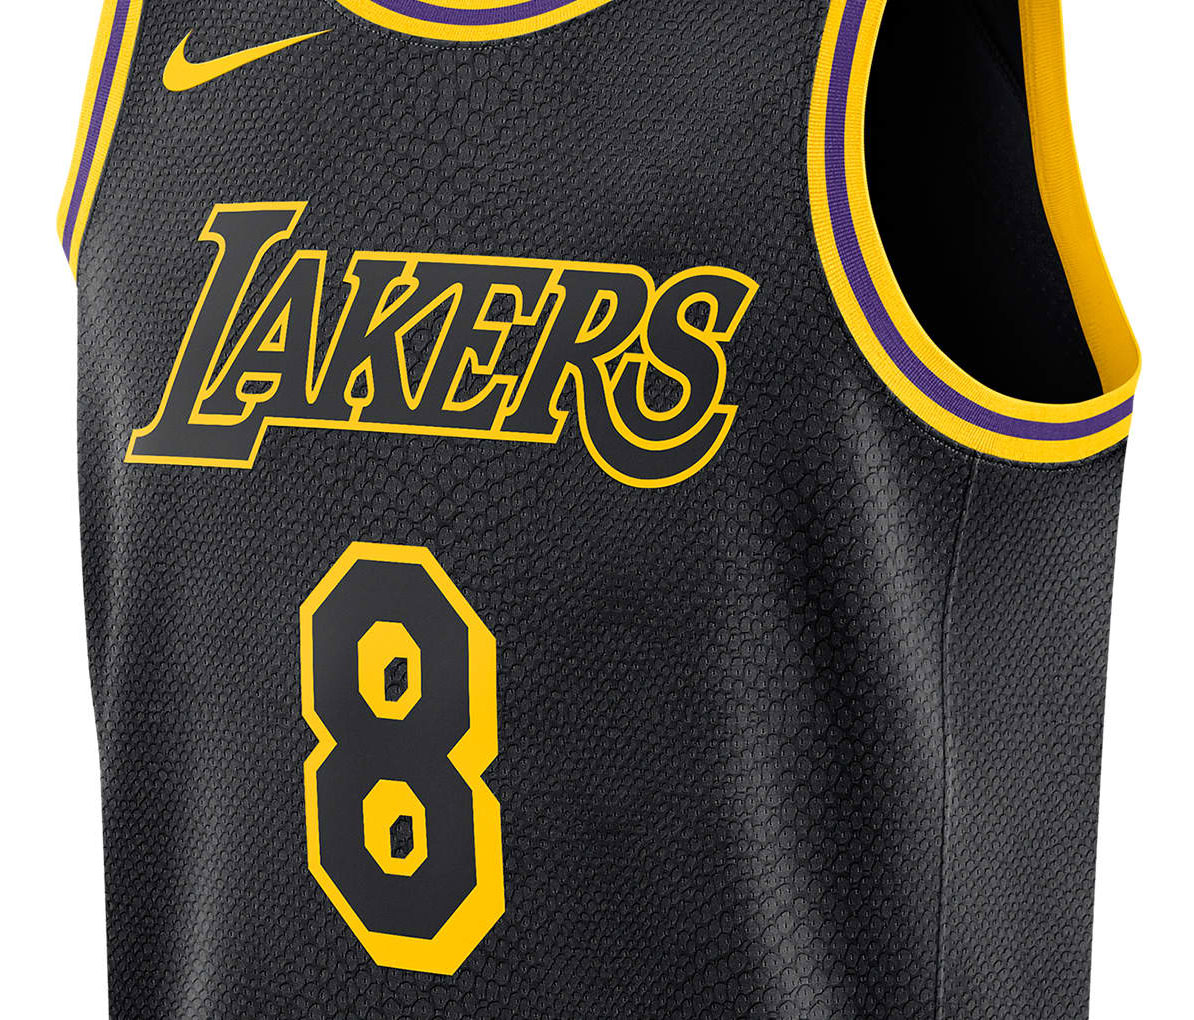 Lakers Black Snakeskin Jersey Flash Sales, UP TO 67% OFF